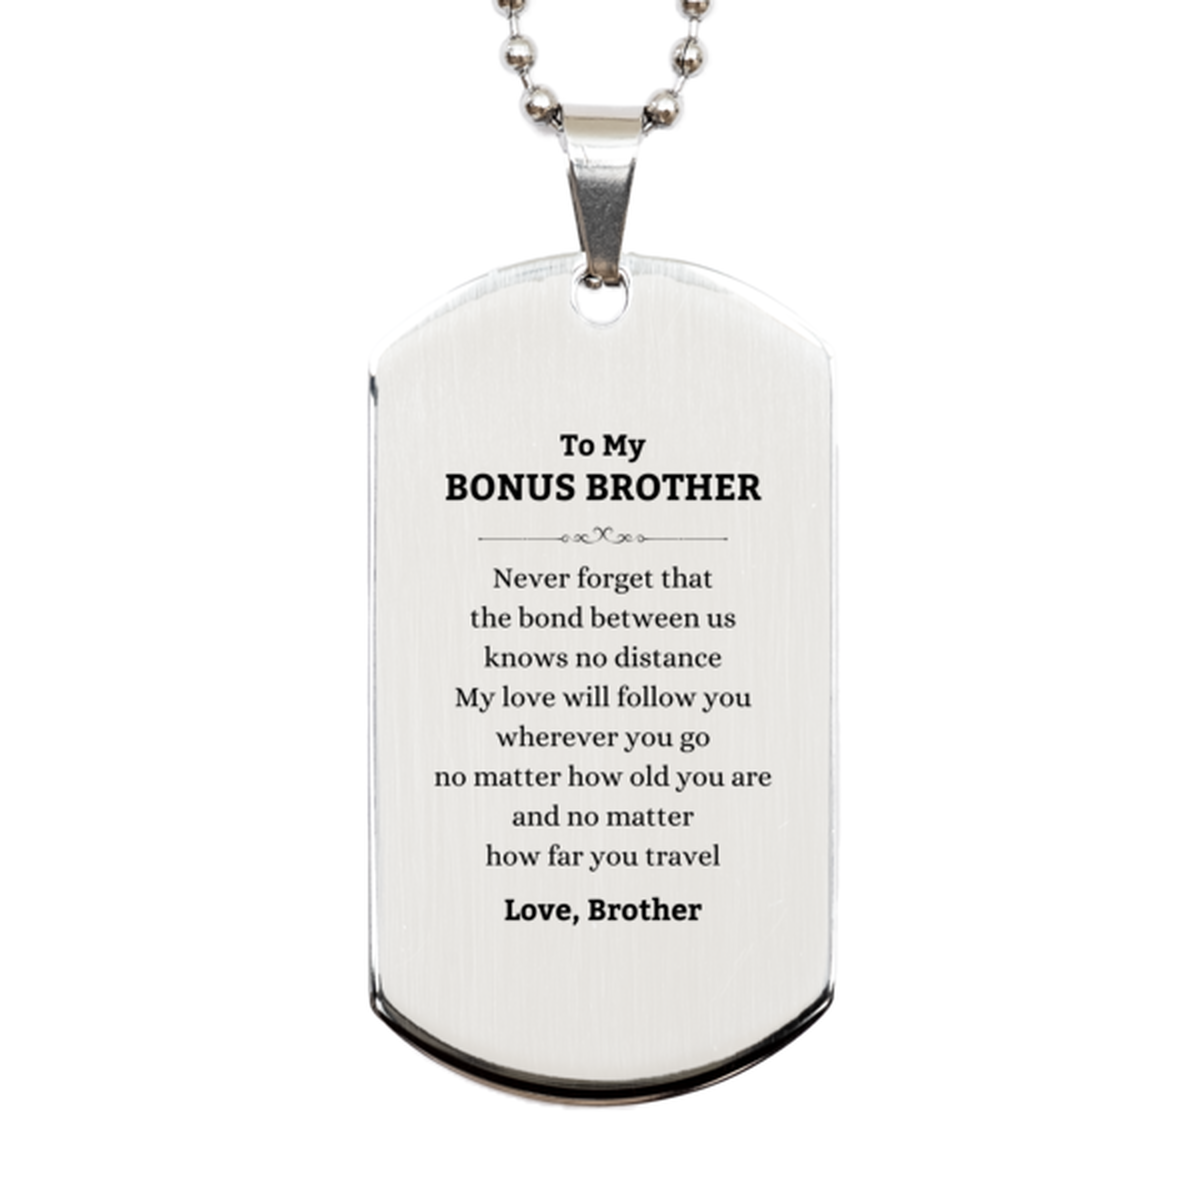 Bonus Brother Birthday Gifts from Brother, Adjustable Silver Dog Tag for Bonus Brother Christmas Graduation Unique Gifts Bonus Brother Never forget that the bond between us knows no distance. Love, Brother